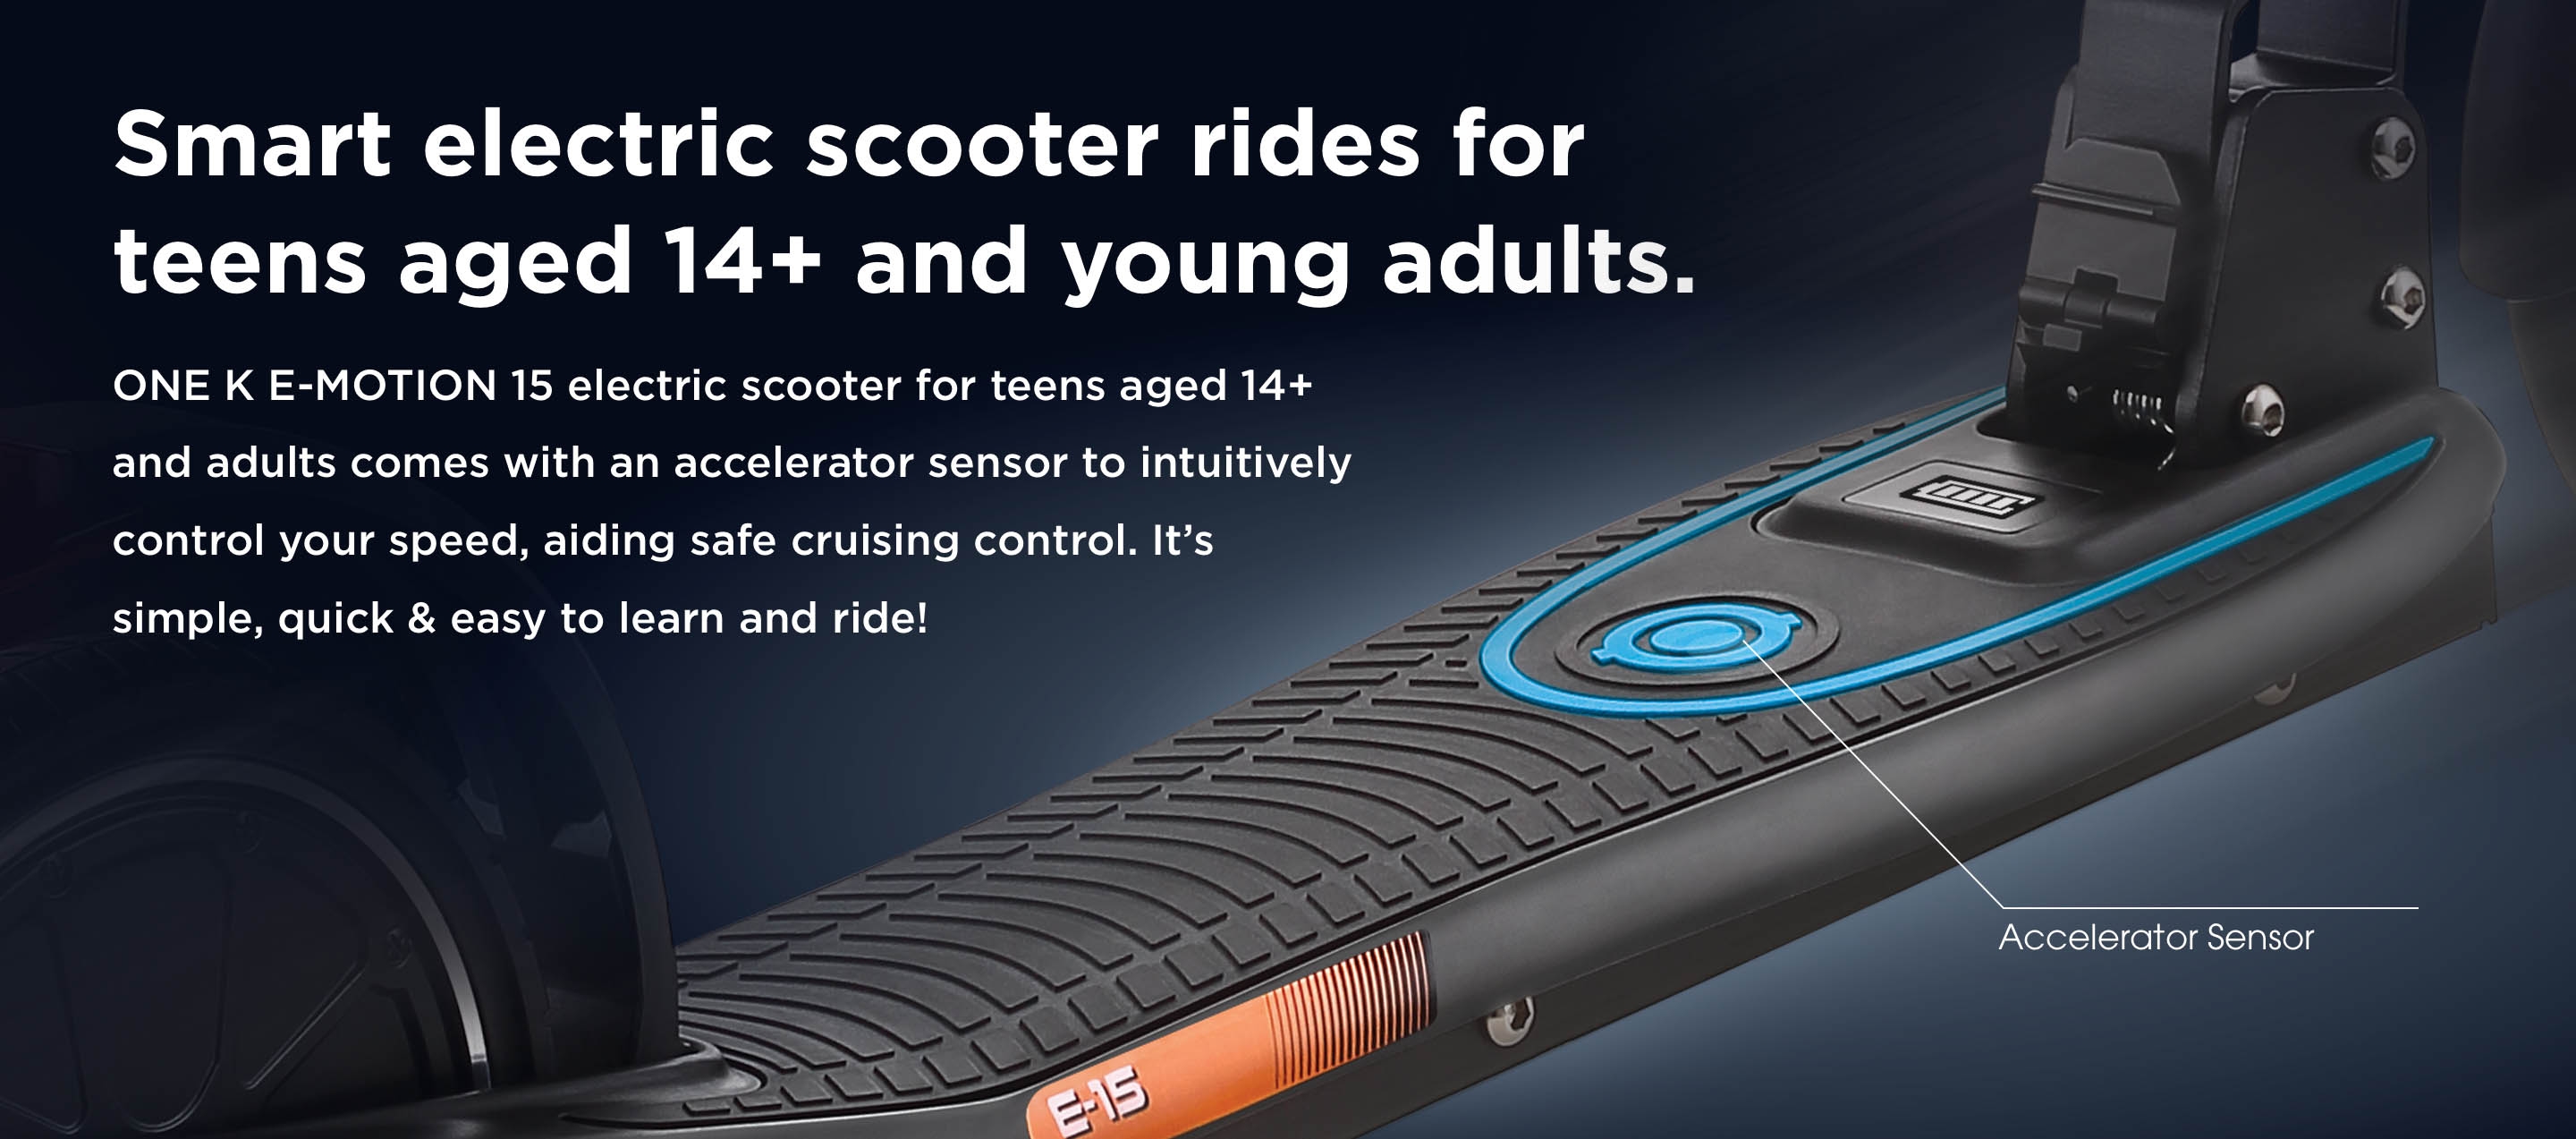 Smart electric scooter rides for teens aged 14+ and young adults. ONE K E-MOTION 15 electric scooter for teens aged 14+ and adults comes with an accelerator sensor to intuitively control your speed, aiding safe cruising control. It’s simple, quick & easy to learn and ride! 